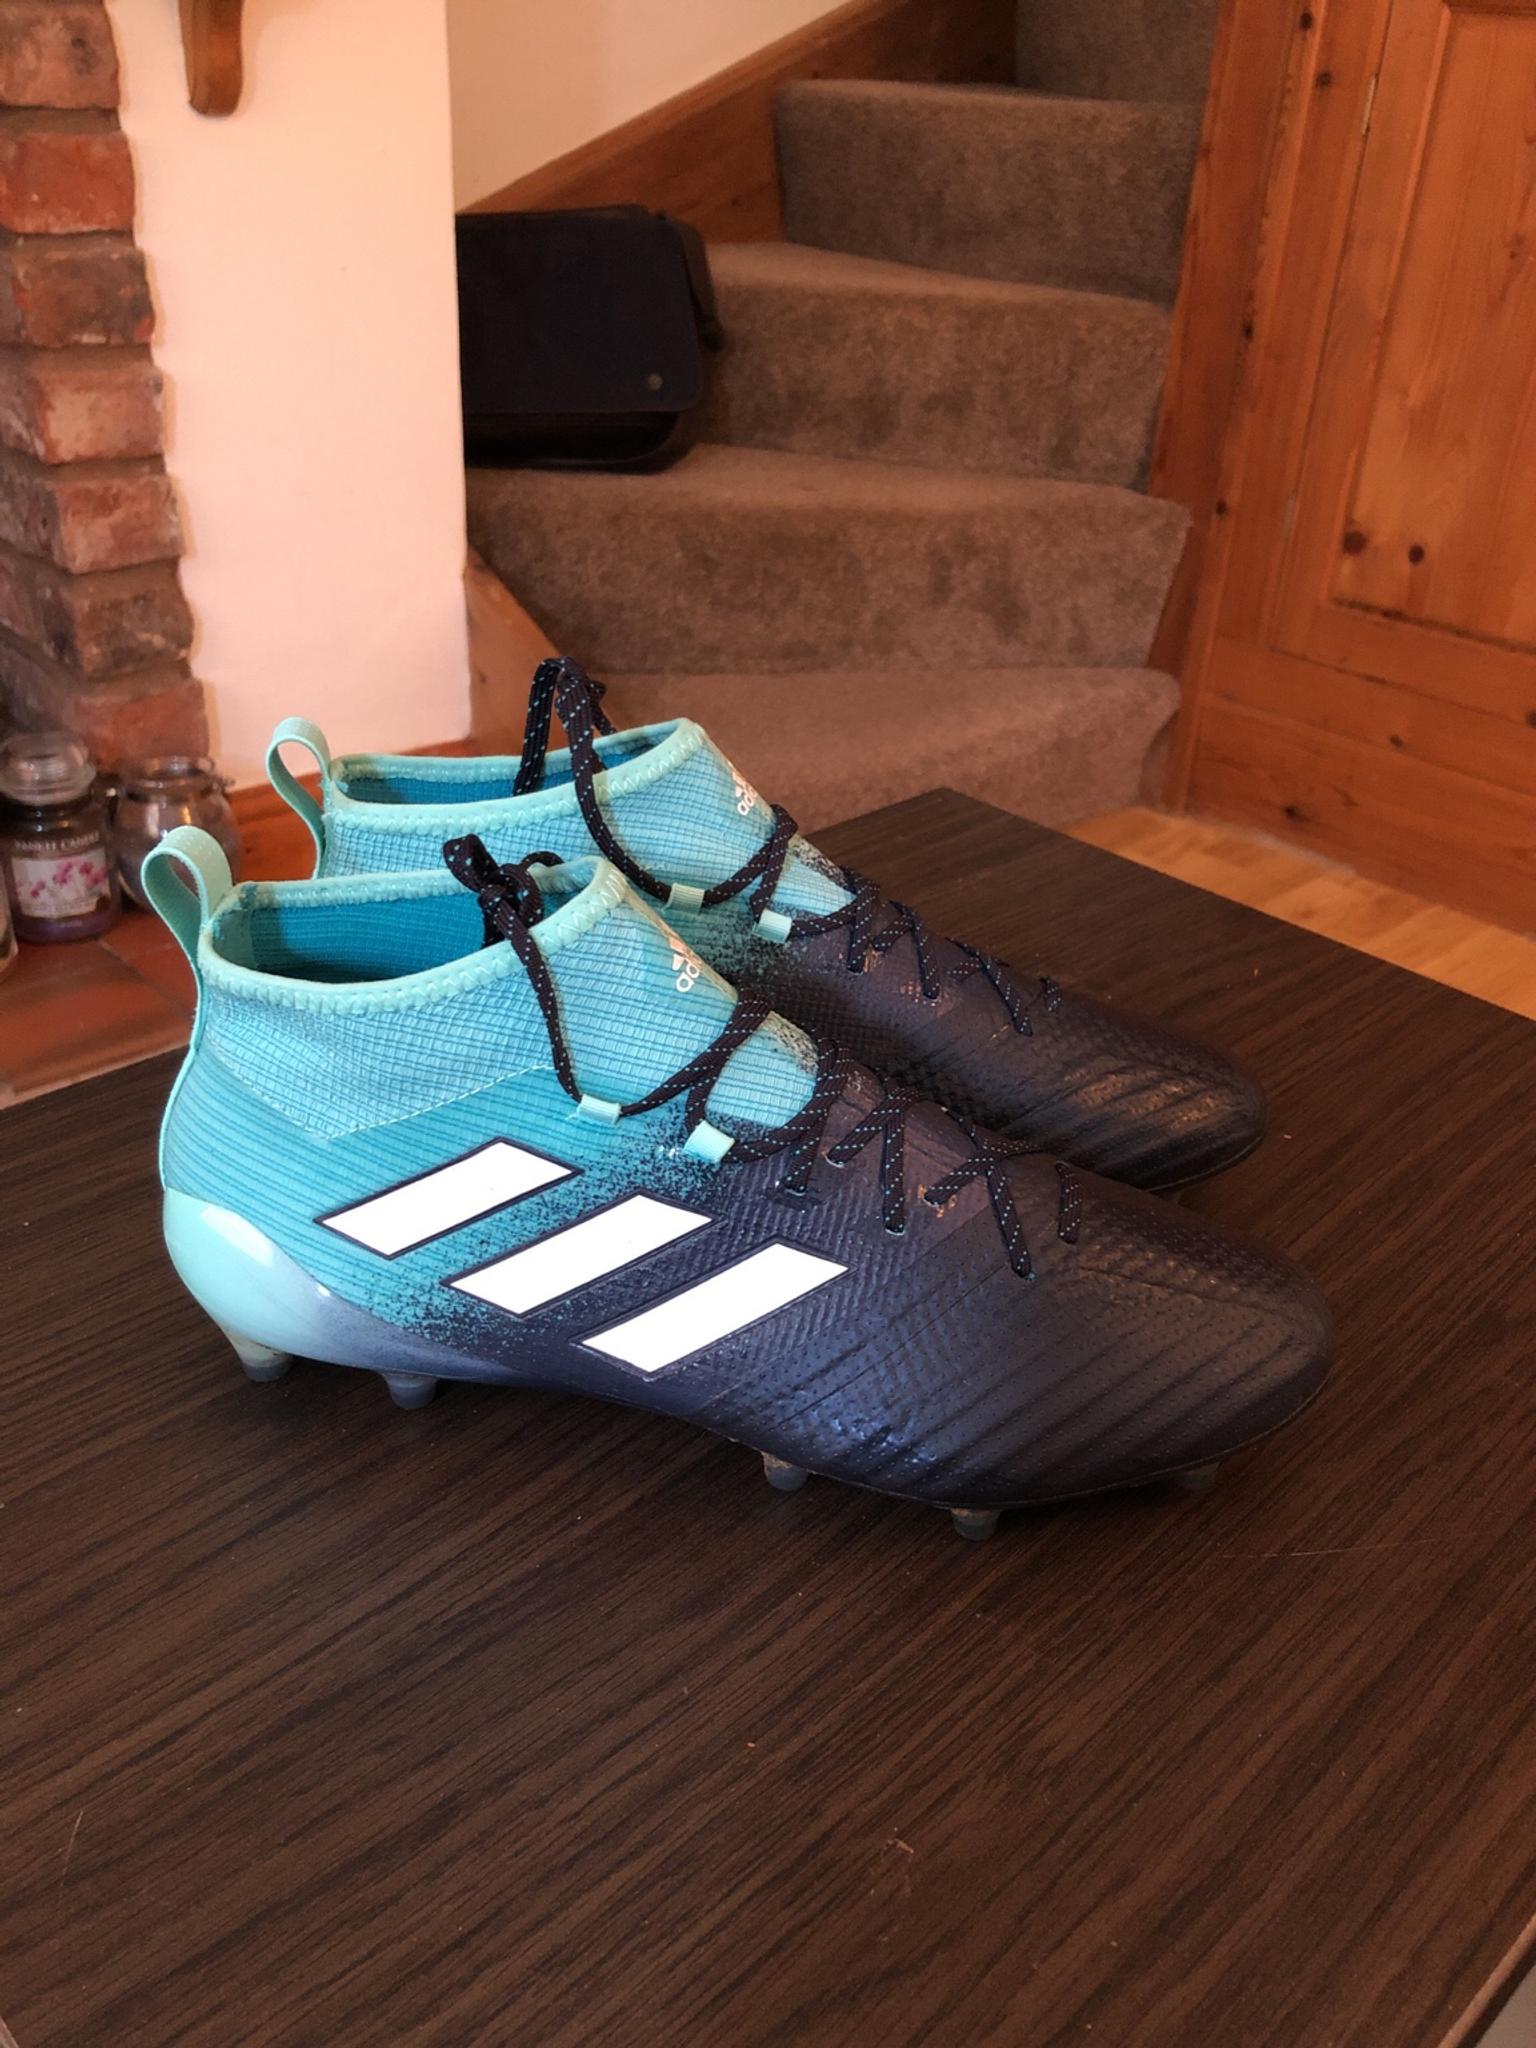 Adidas Ace 17.1 fg size 9 in SK11 Macclesfield for £35.00 for sale | Shpock